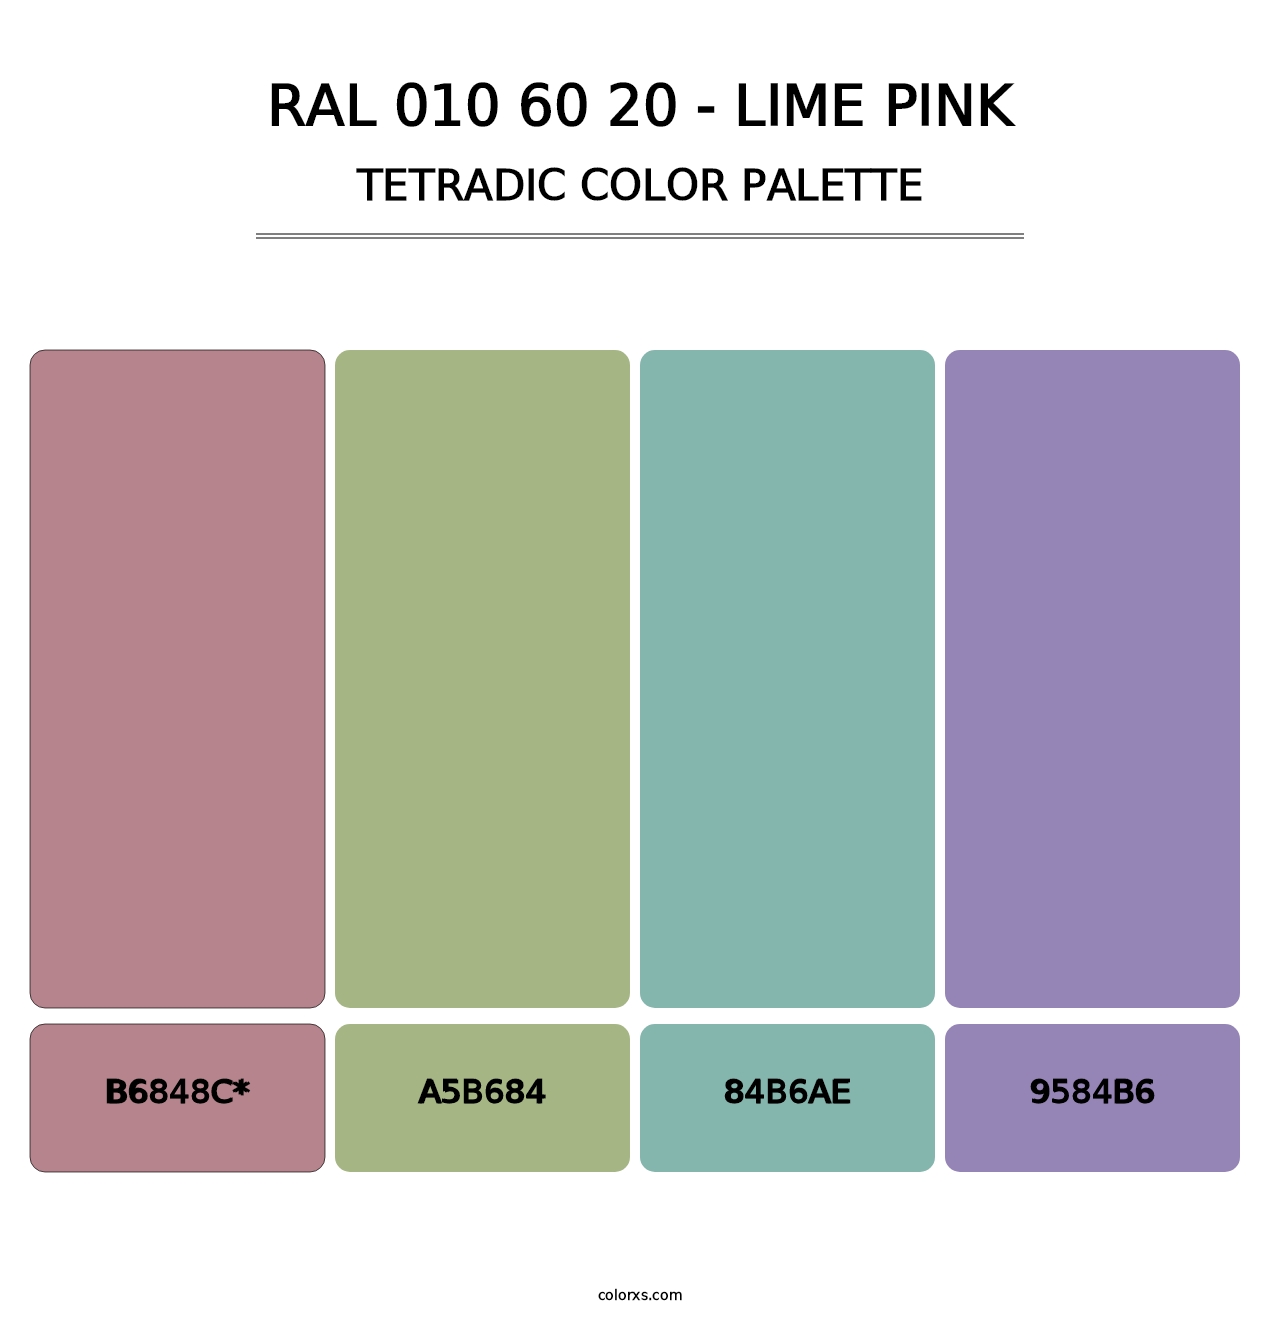 RAL 010 60 20 - Lime Pink - Tetradic Color Palette